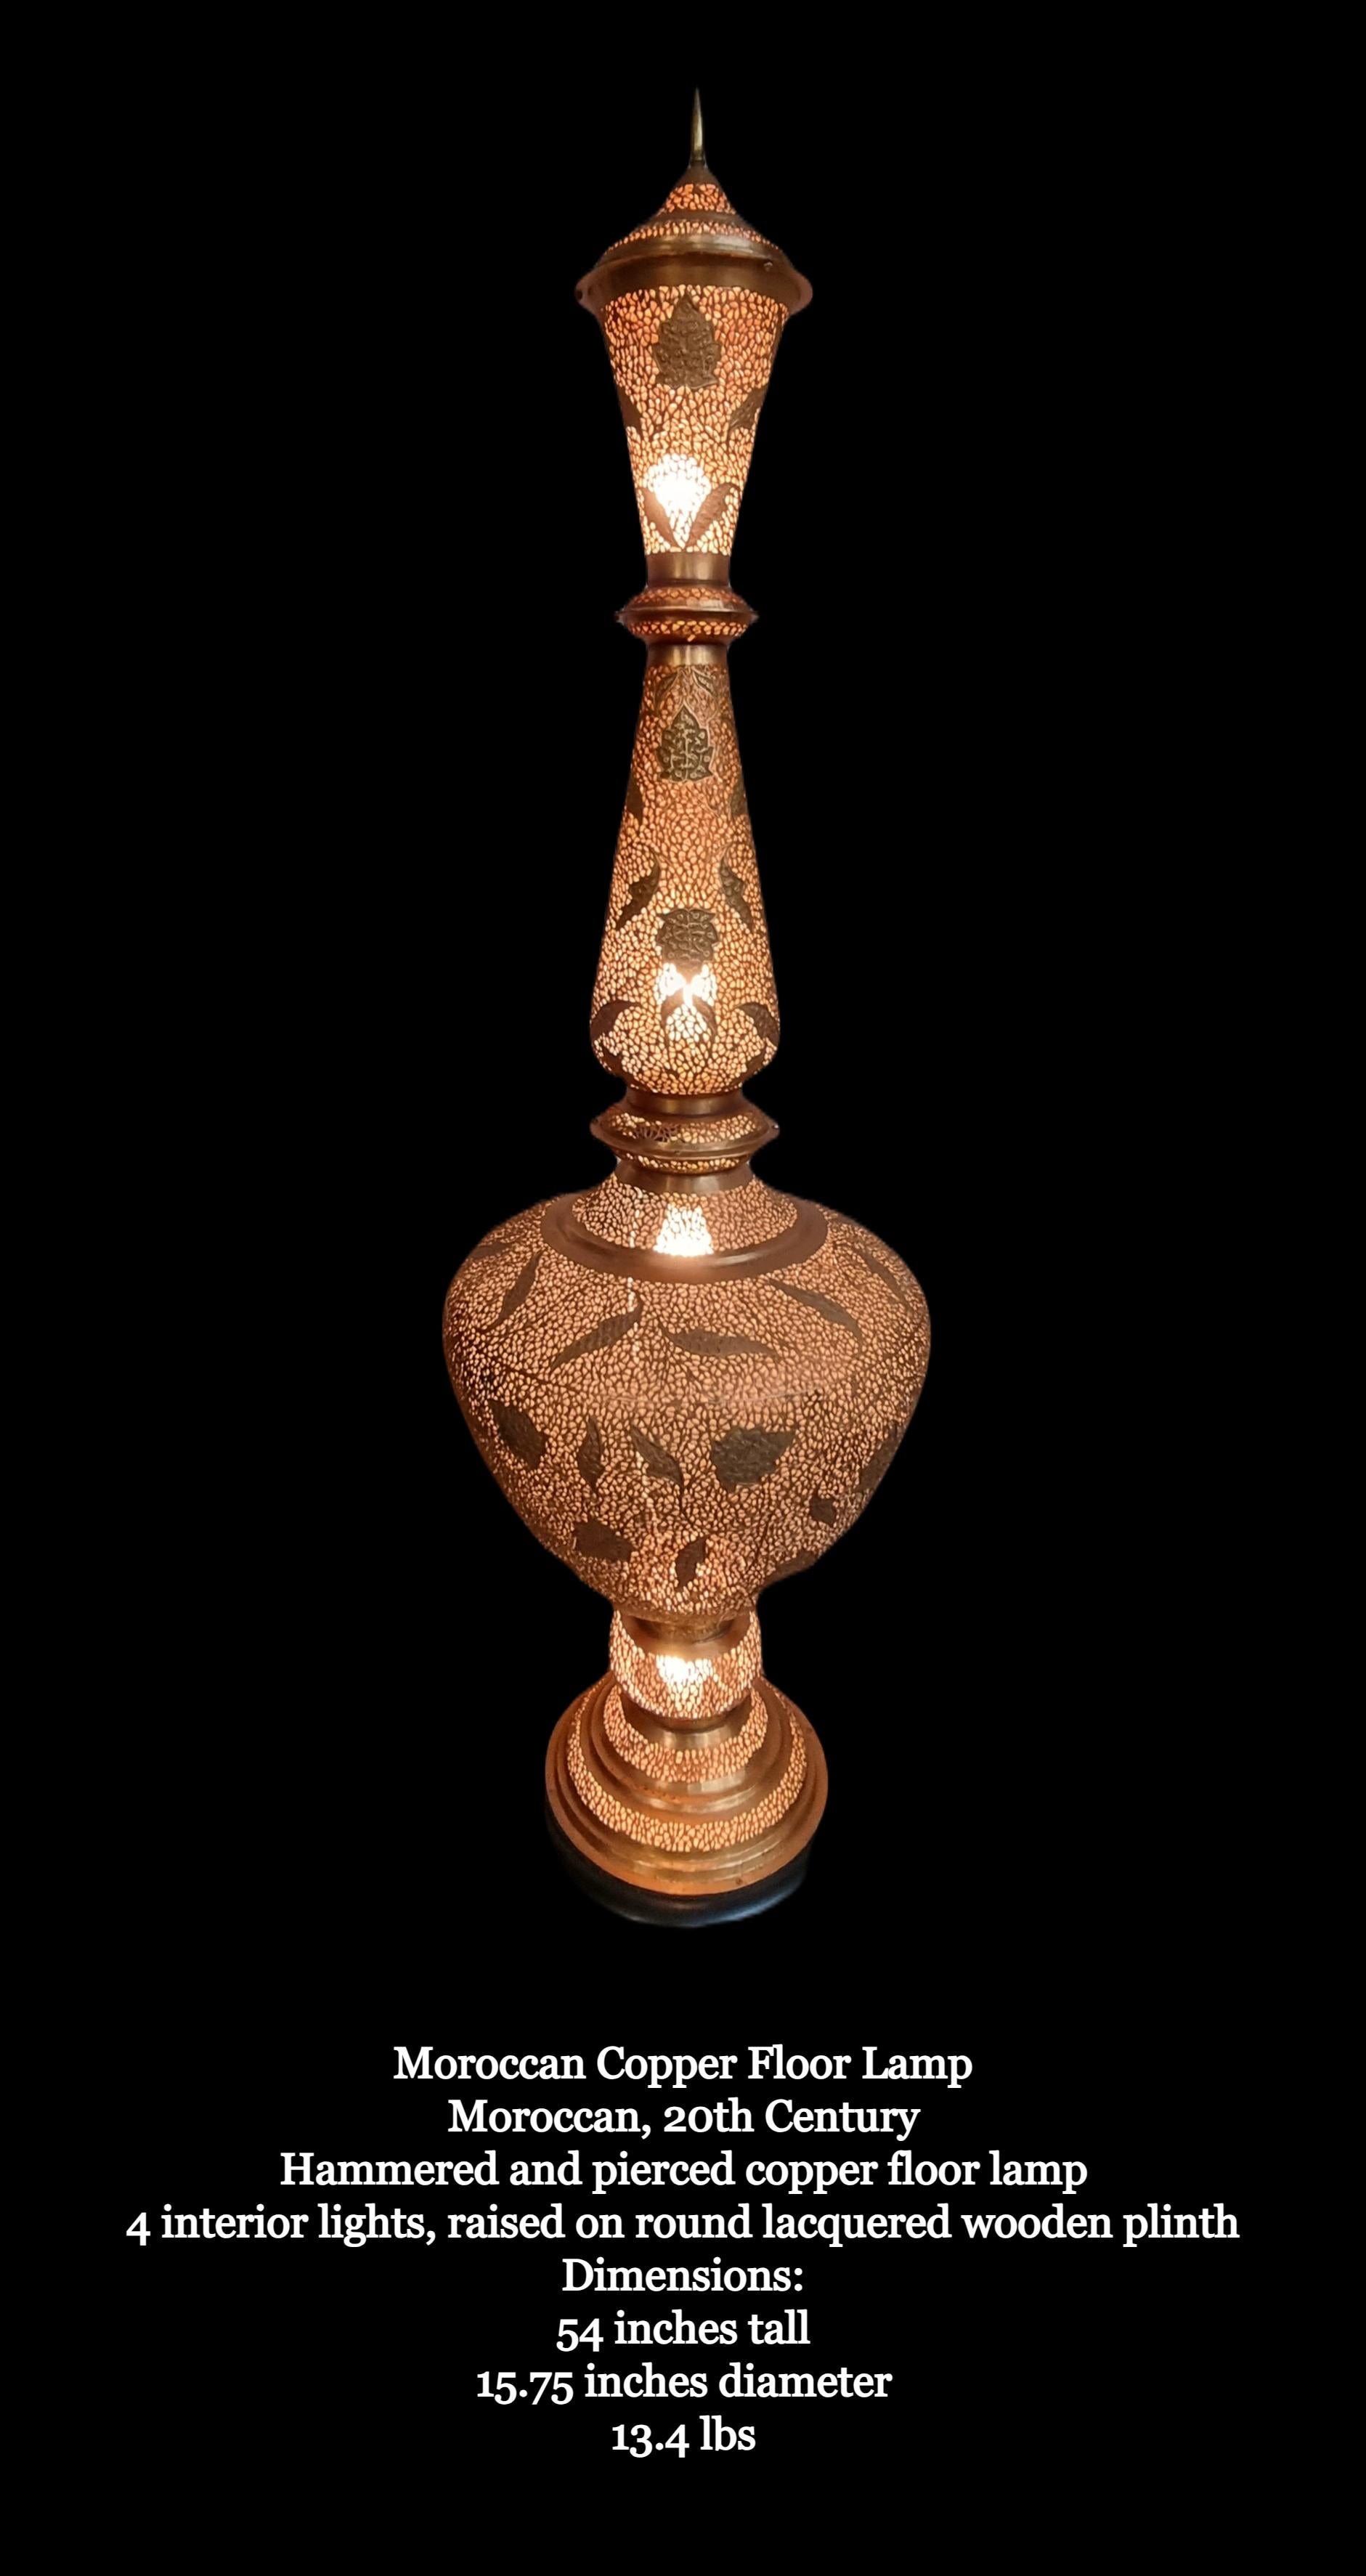 Impressive Moroccan Hand Hammered & Pierced Copper/Alloy Floor Lamp

Moroccan, 20th Century.

Hammered and pierced copper/alloy floor lamp
4 interior lights, raised on round lacquered wooden plinth.
Due to size shipping quote will be quoted per